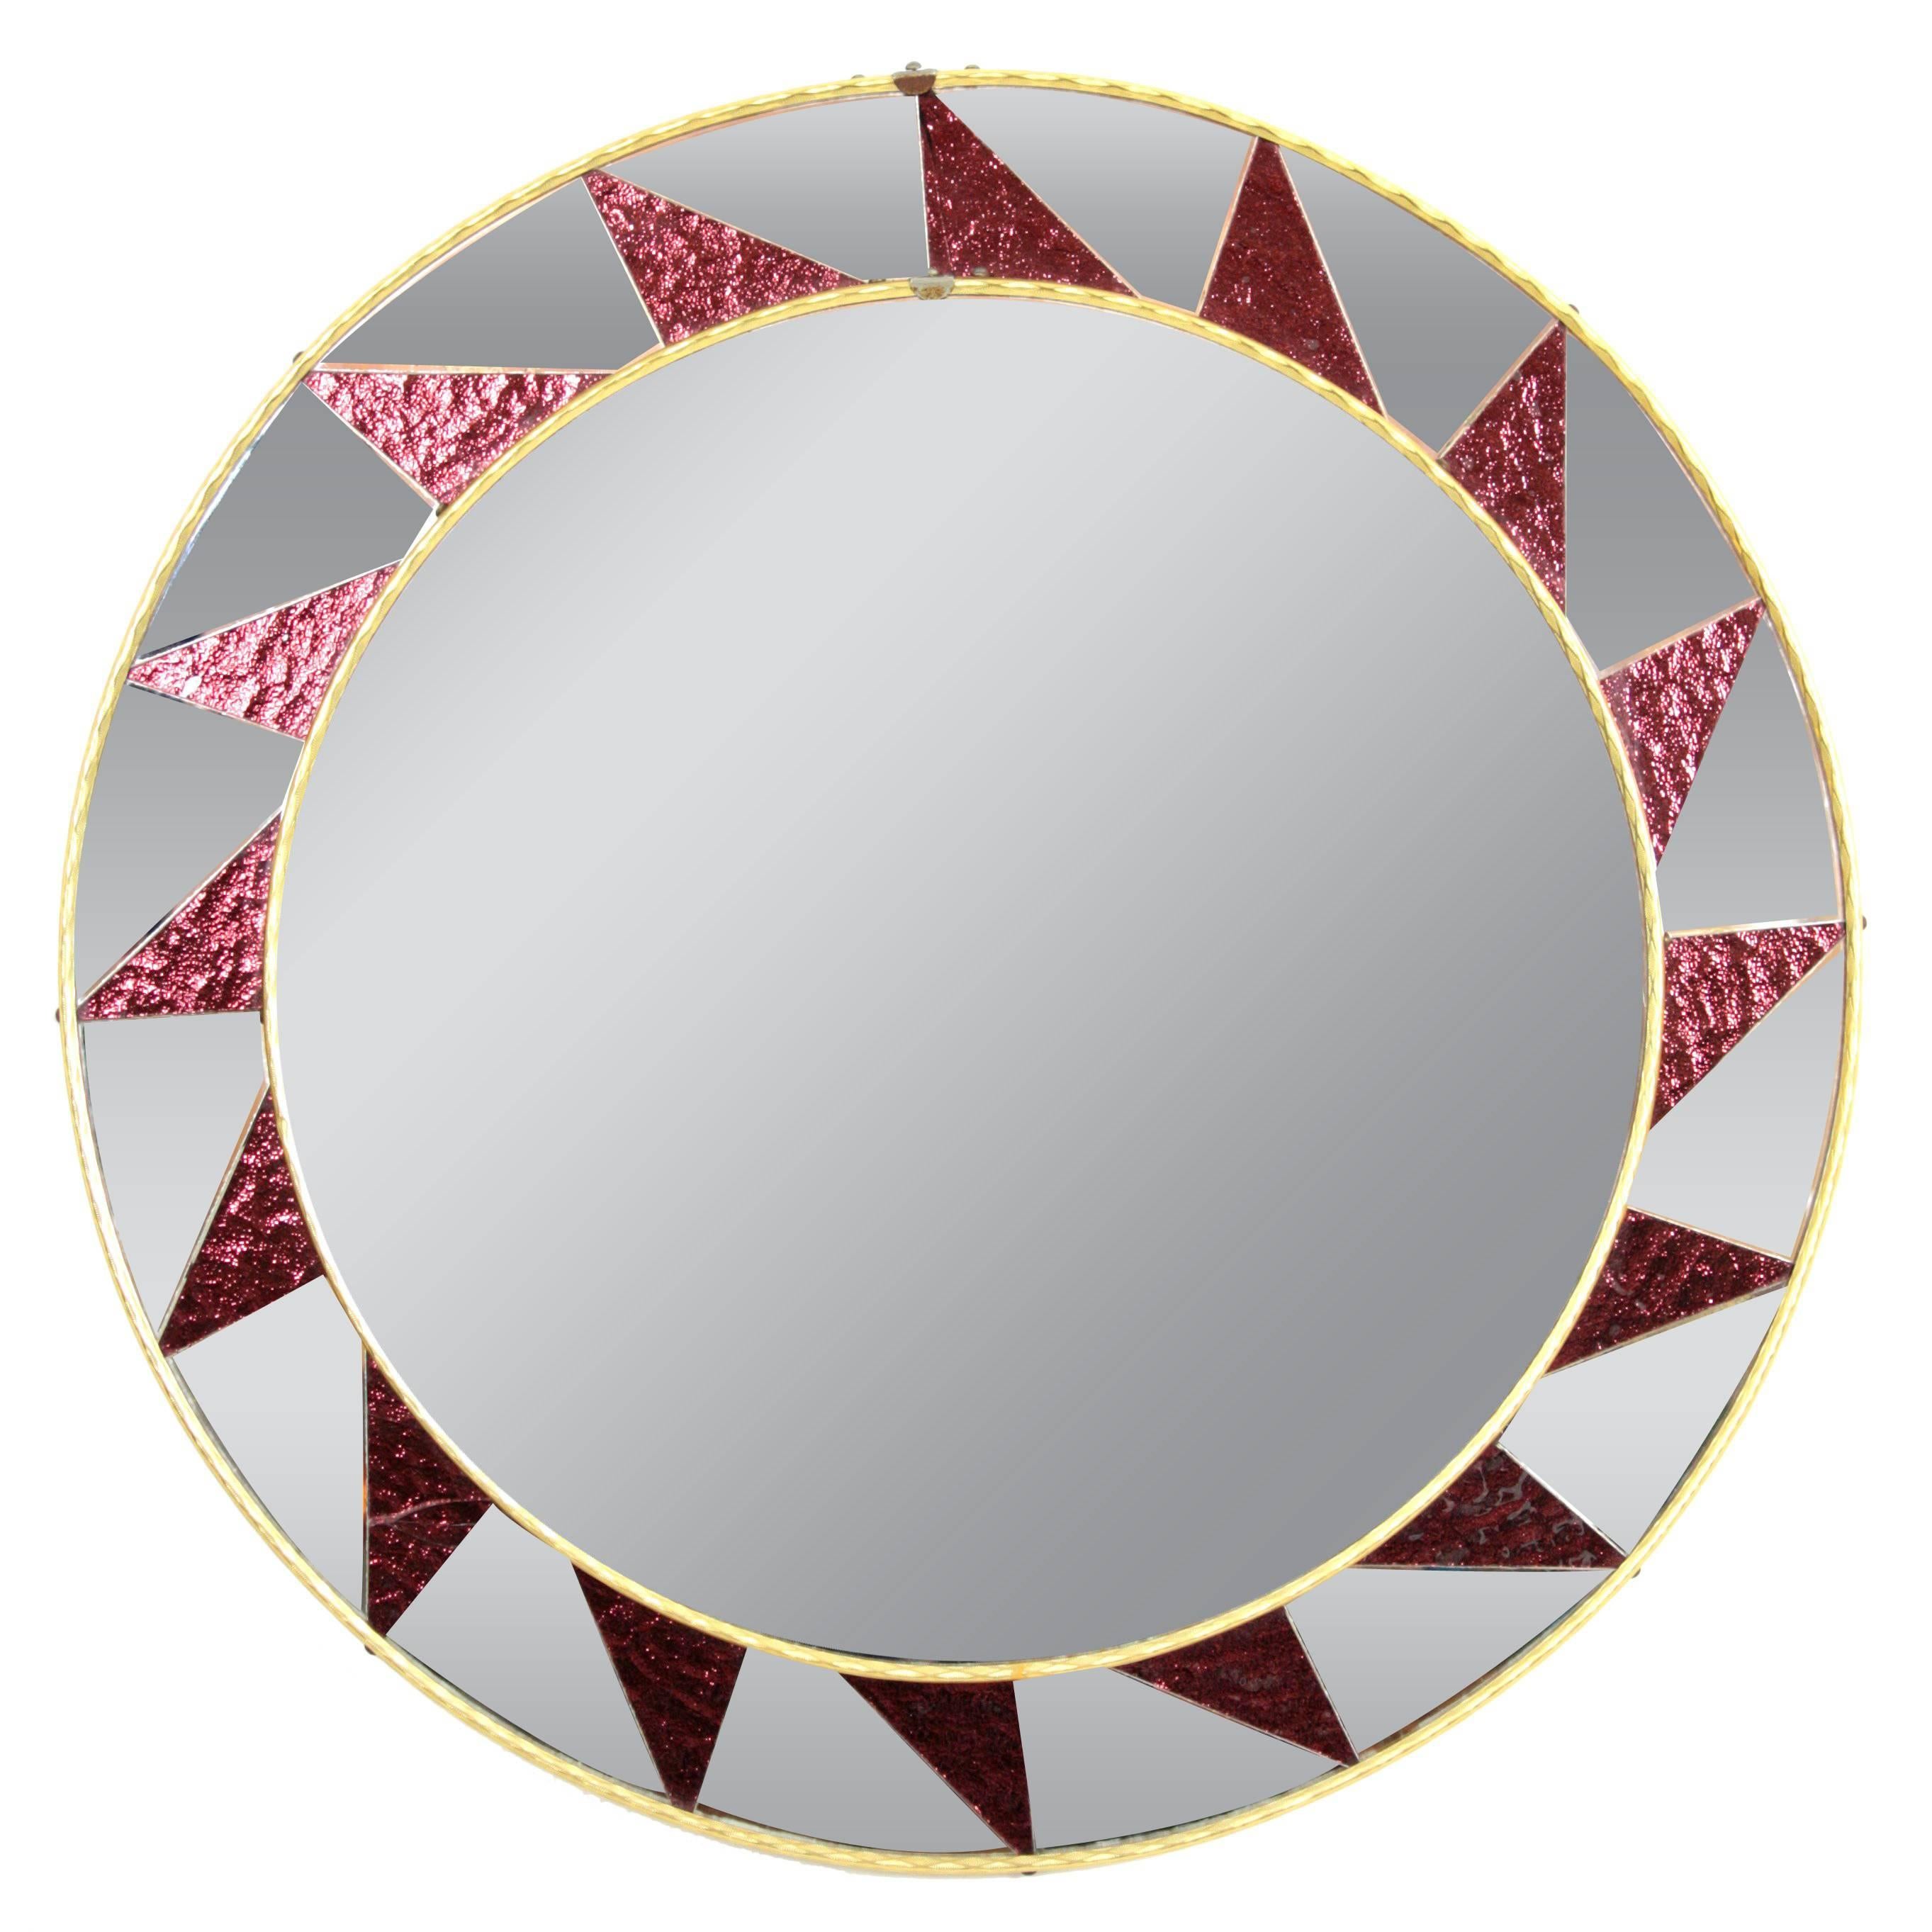 1960s Mosaic Circular Mirror Framed by a Pattern of Garned Mirrored Glasses For Sale